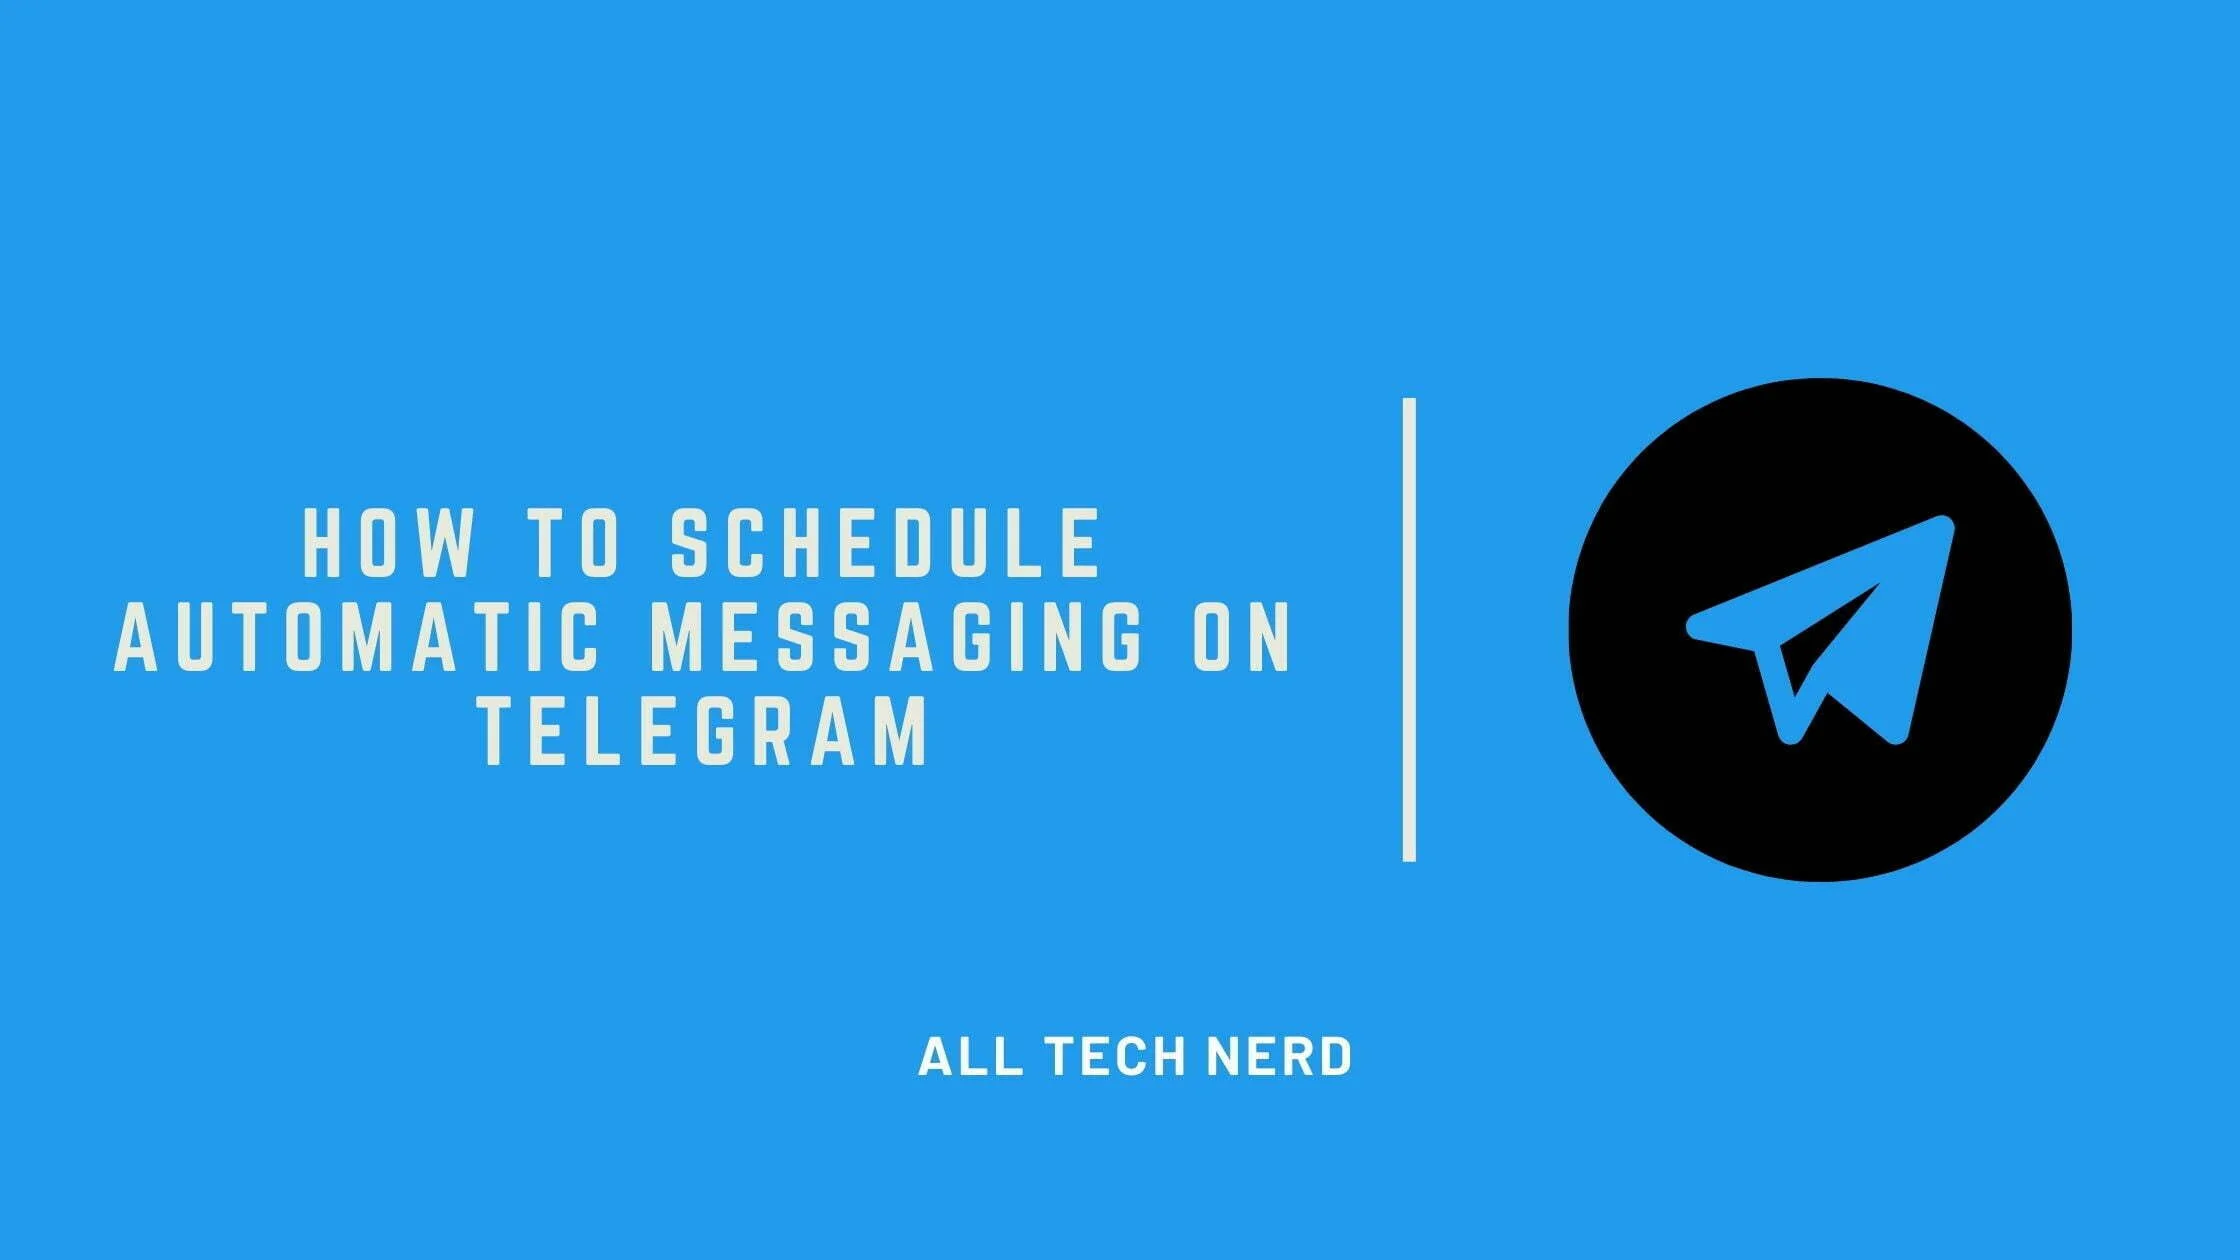 How to Schedule Automatic Messaging on Telegram